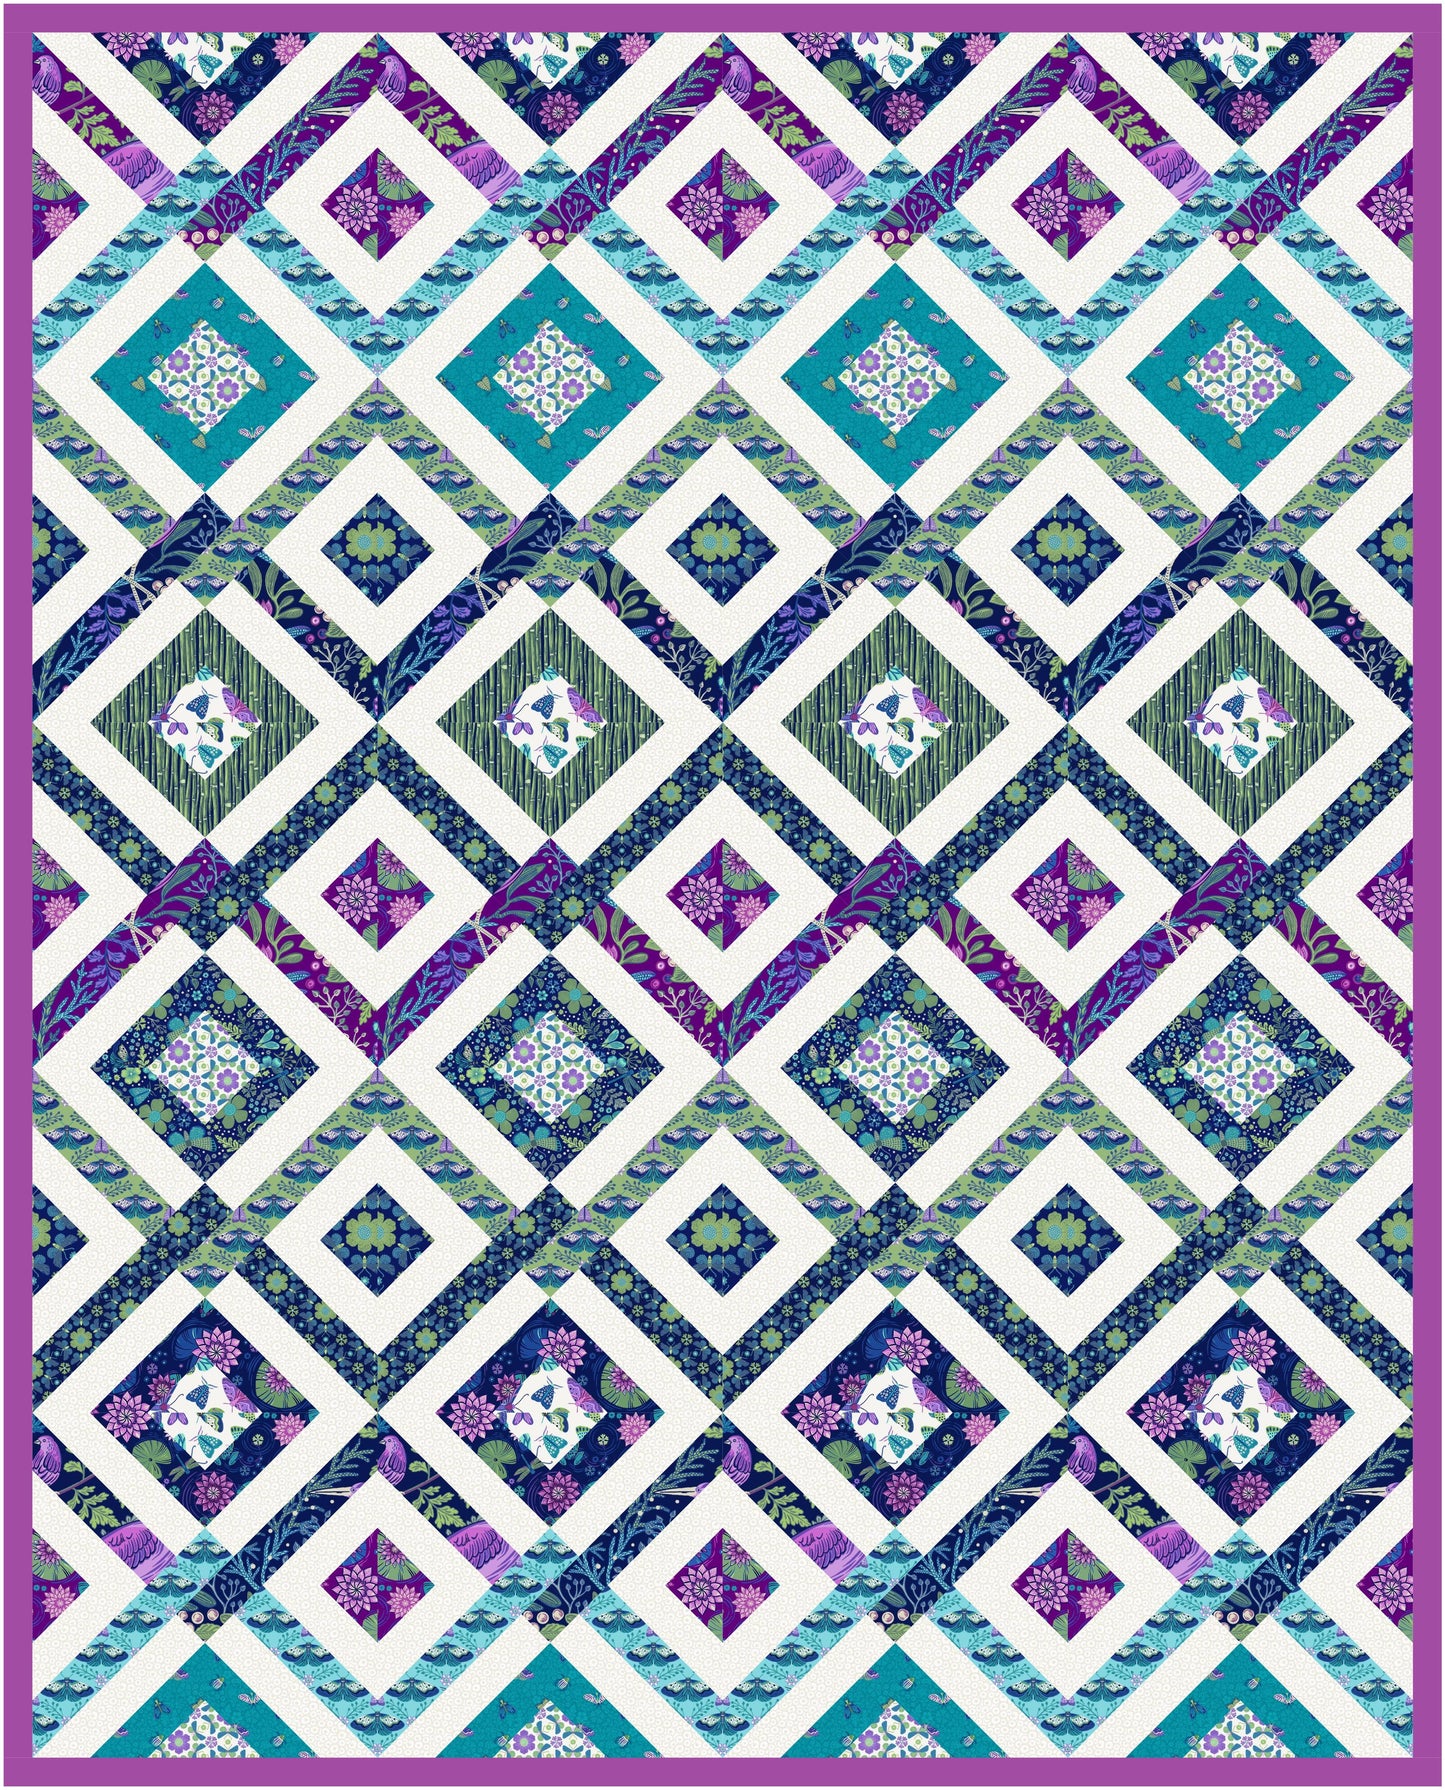 Water's Edge Entangled Quilt Pattern - Physical Copy